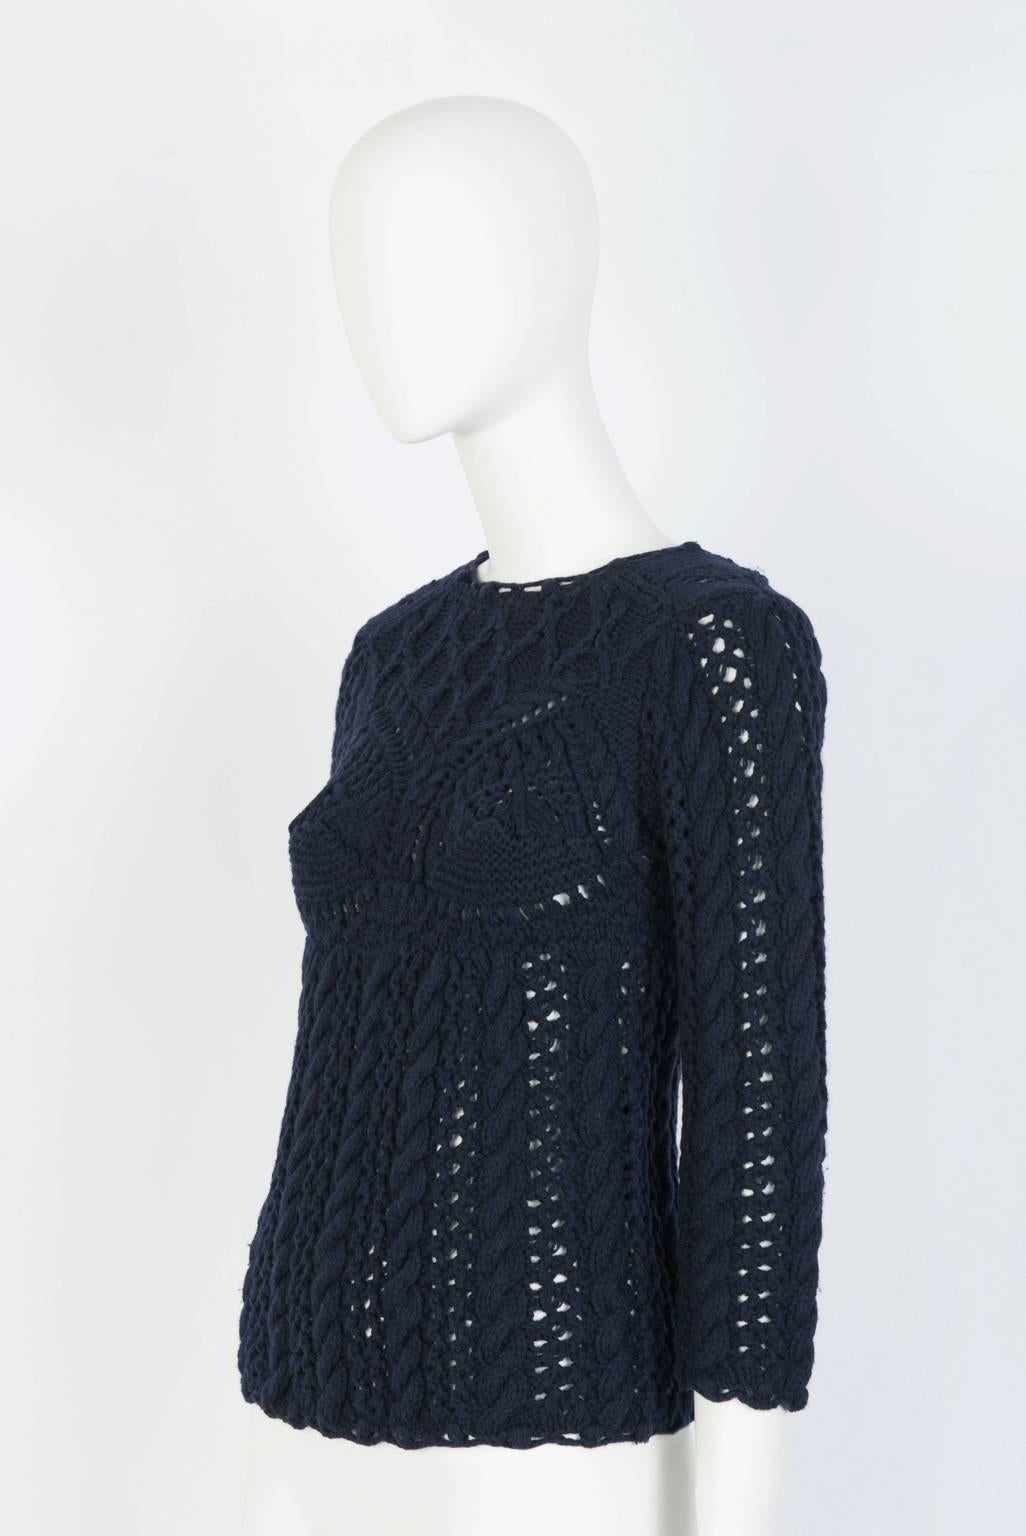 Thick crochet knit sweater with crew neck, 3/4 length sleeves, bust detailing, and back button closure.